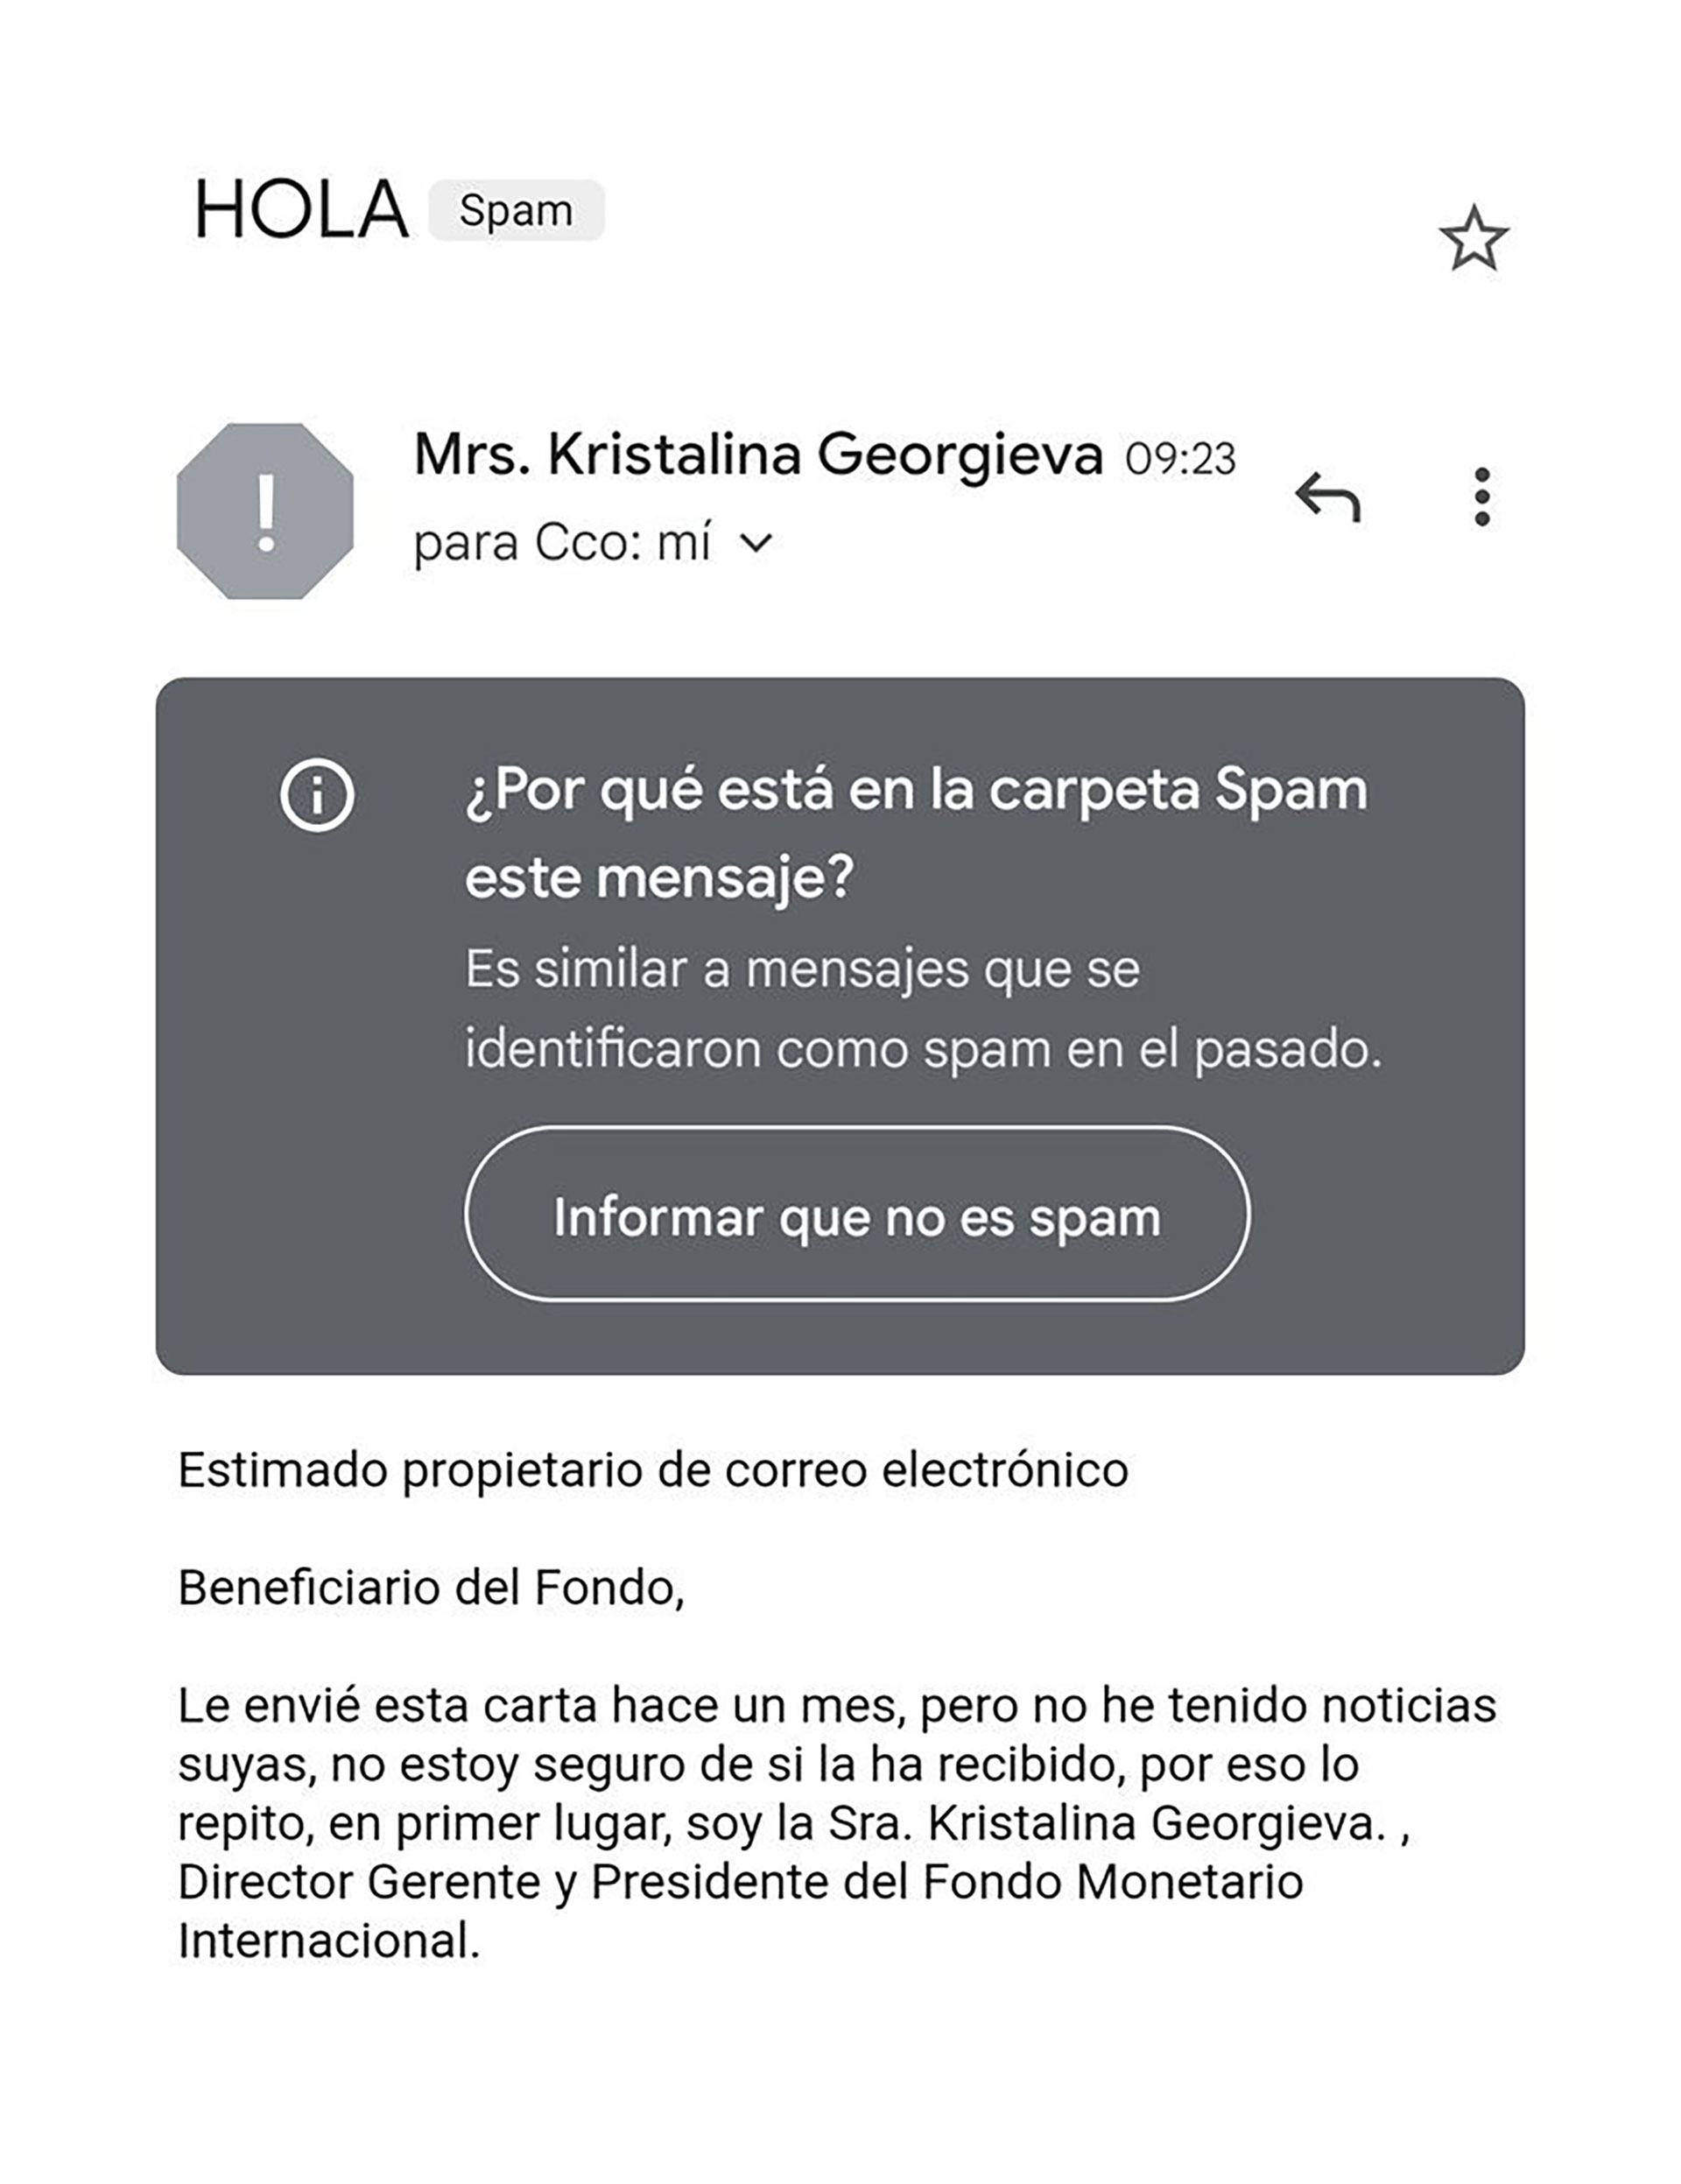 The text of the scam that invokes the IMF official